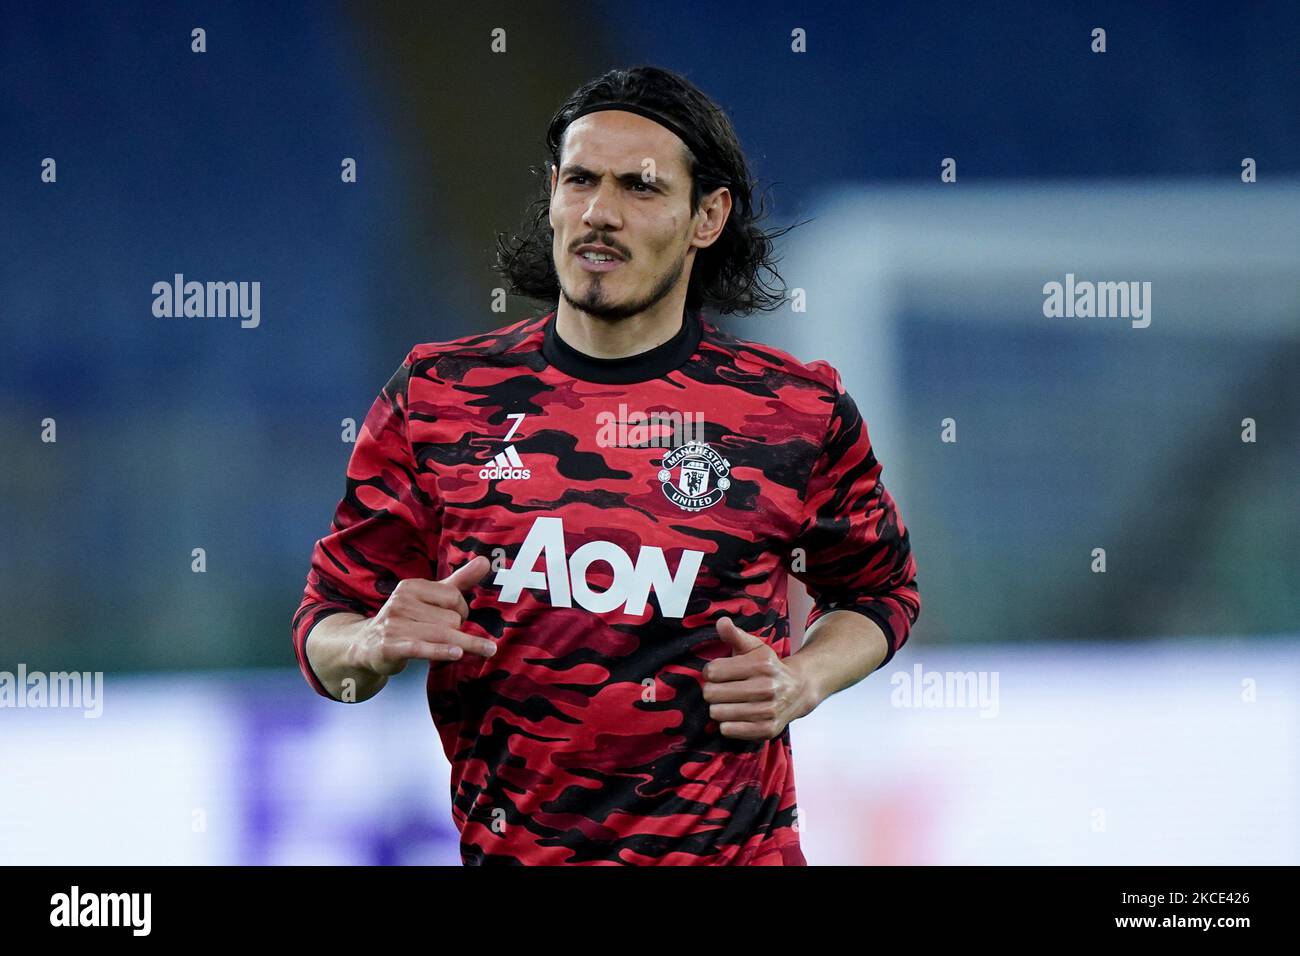 Edinson Cavani of Manchester United looks on during the UEFA Europa League Semi-Final match between AS Roma and Manchester United at Stadio Olimpico, Rome, Italy on 6 May 2021. (Photo by Giuseppe Maffia/NurPhoto) Stock Photo